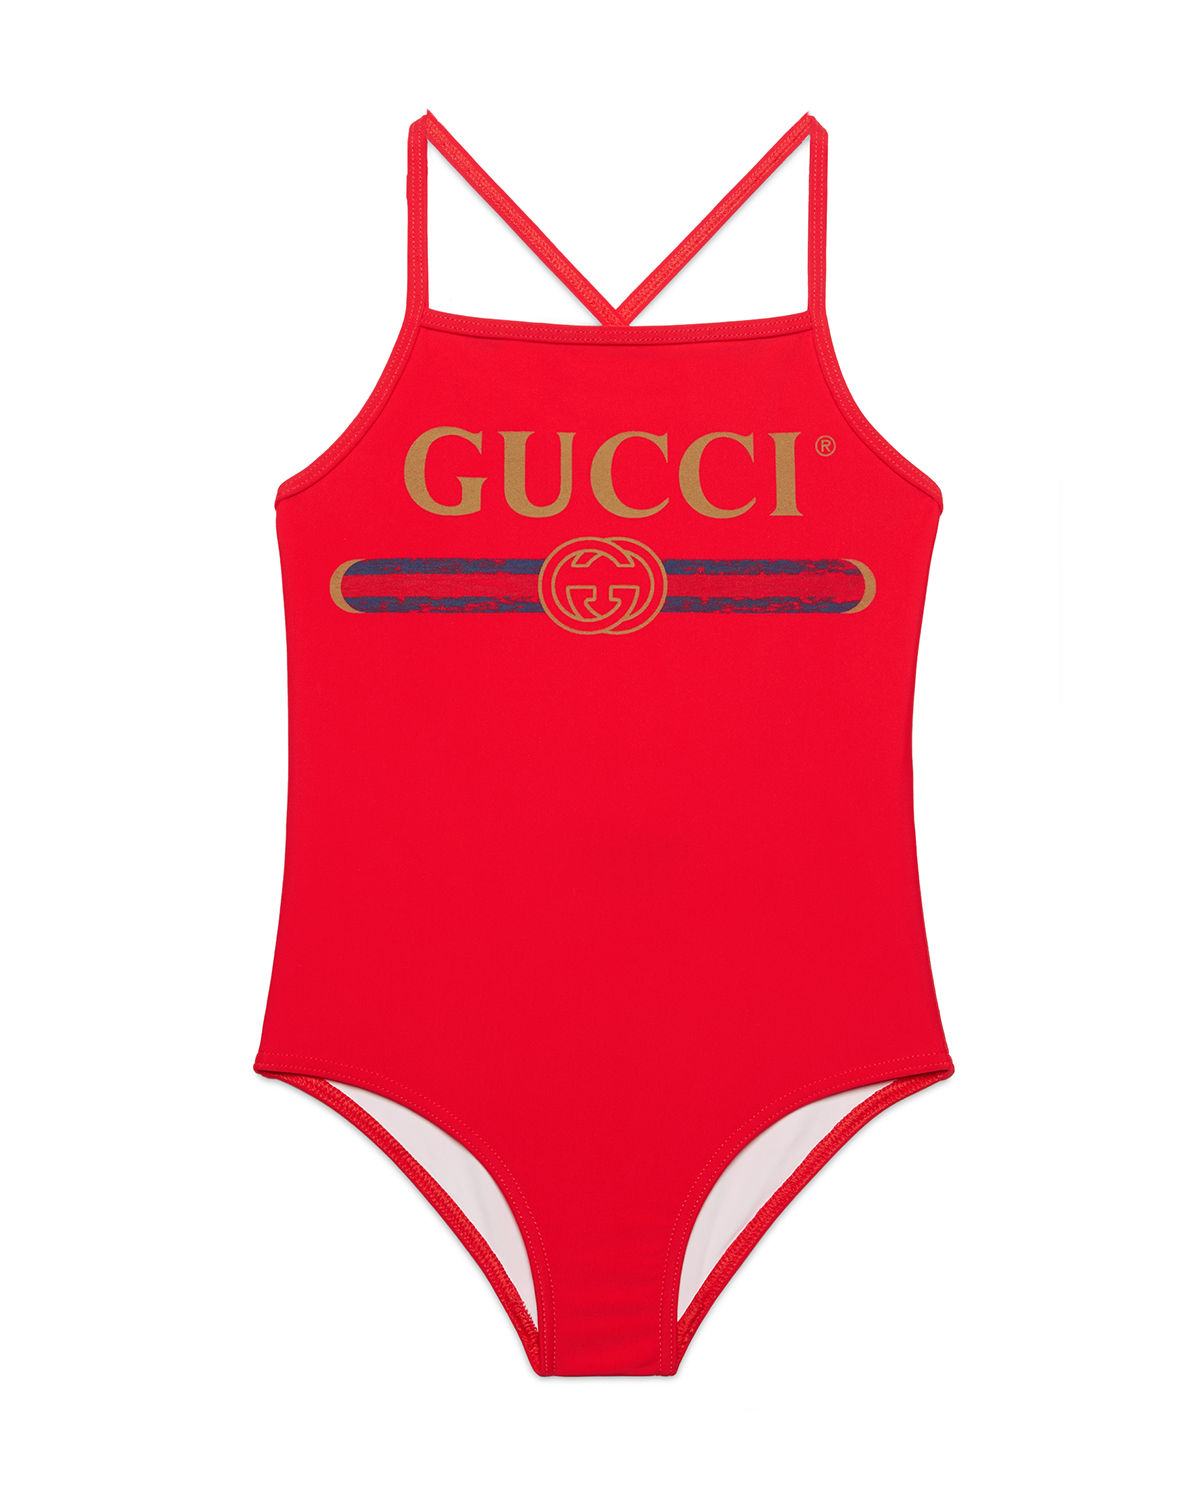 Gucci Kids' One-piece Logo Swimsuit In Candy Apple | ModeSens